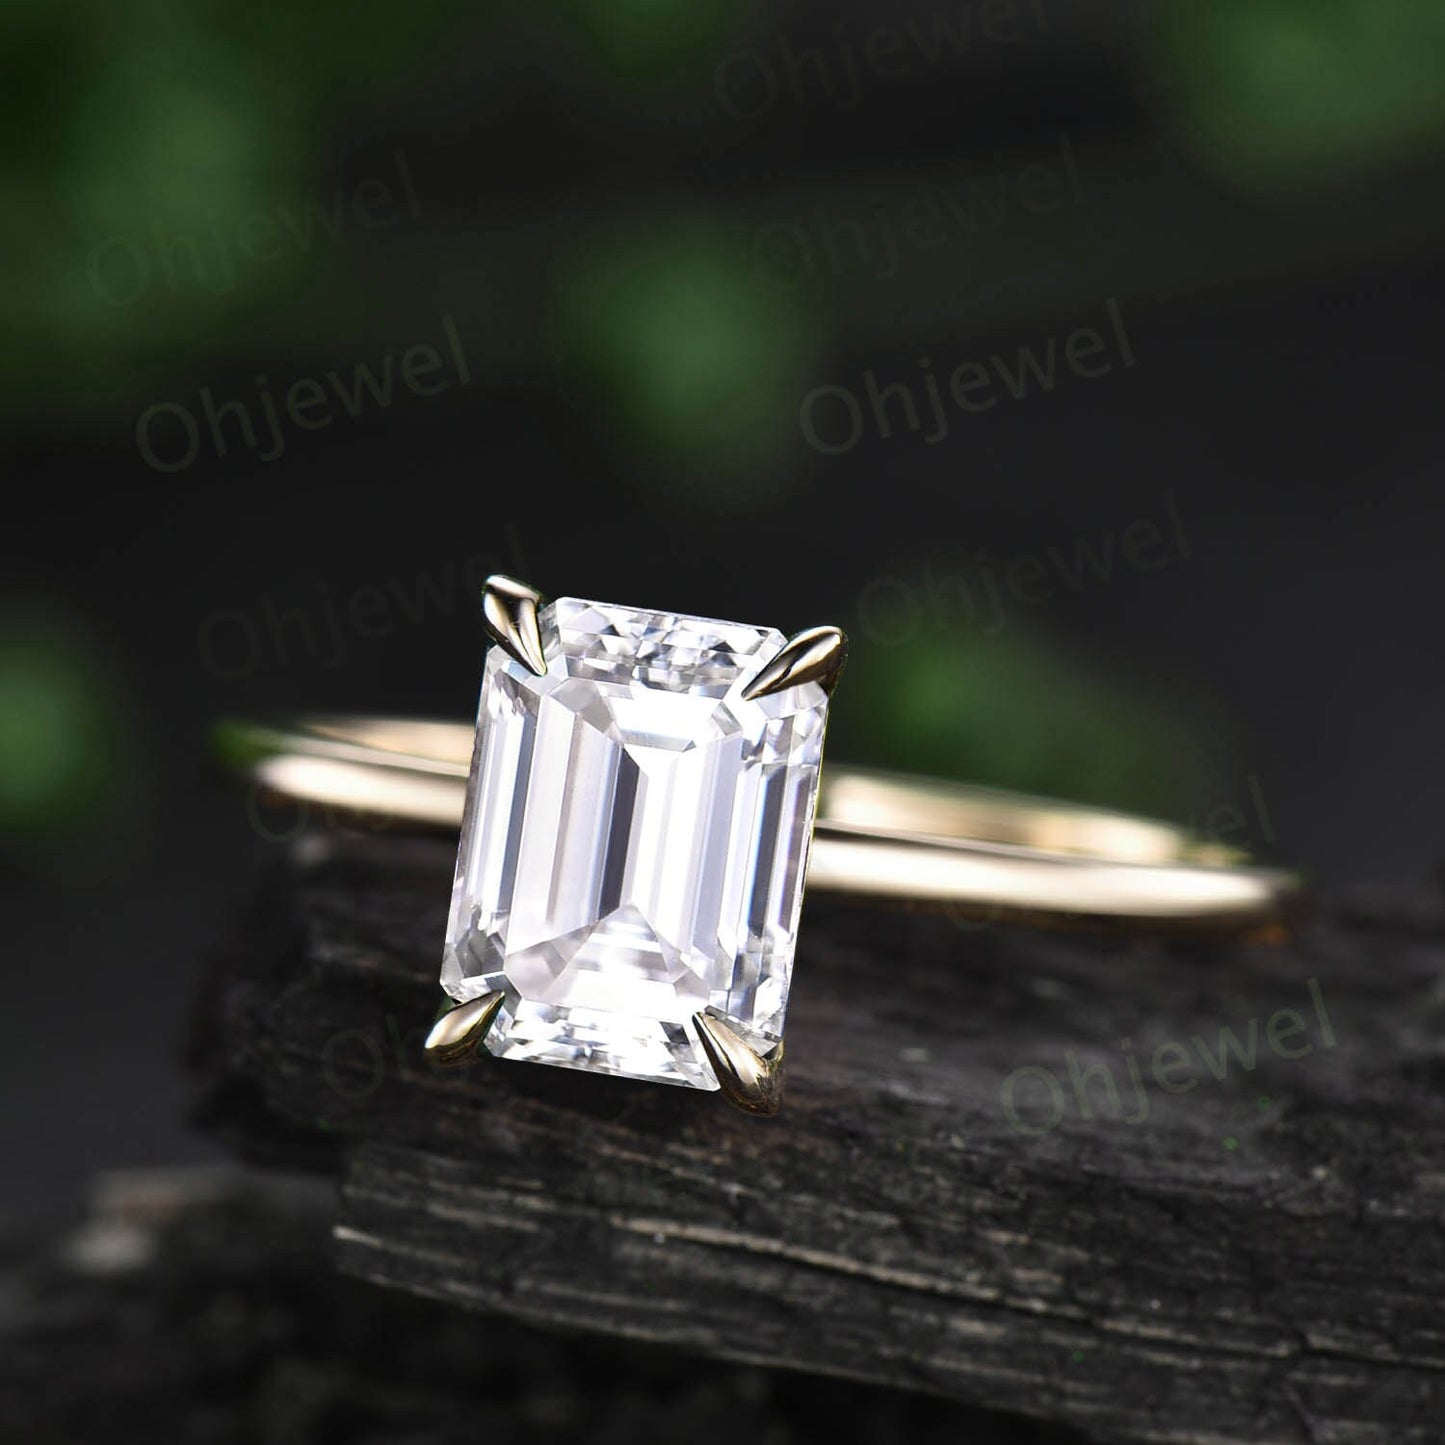 4ct emerald cut moissanite engagement ring rose gold vintage unique Solitaire engagement ring women wedding bridal promise ring gift for her